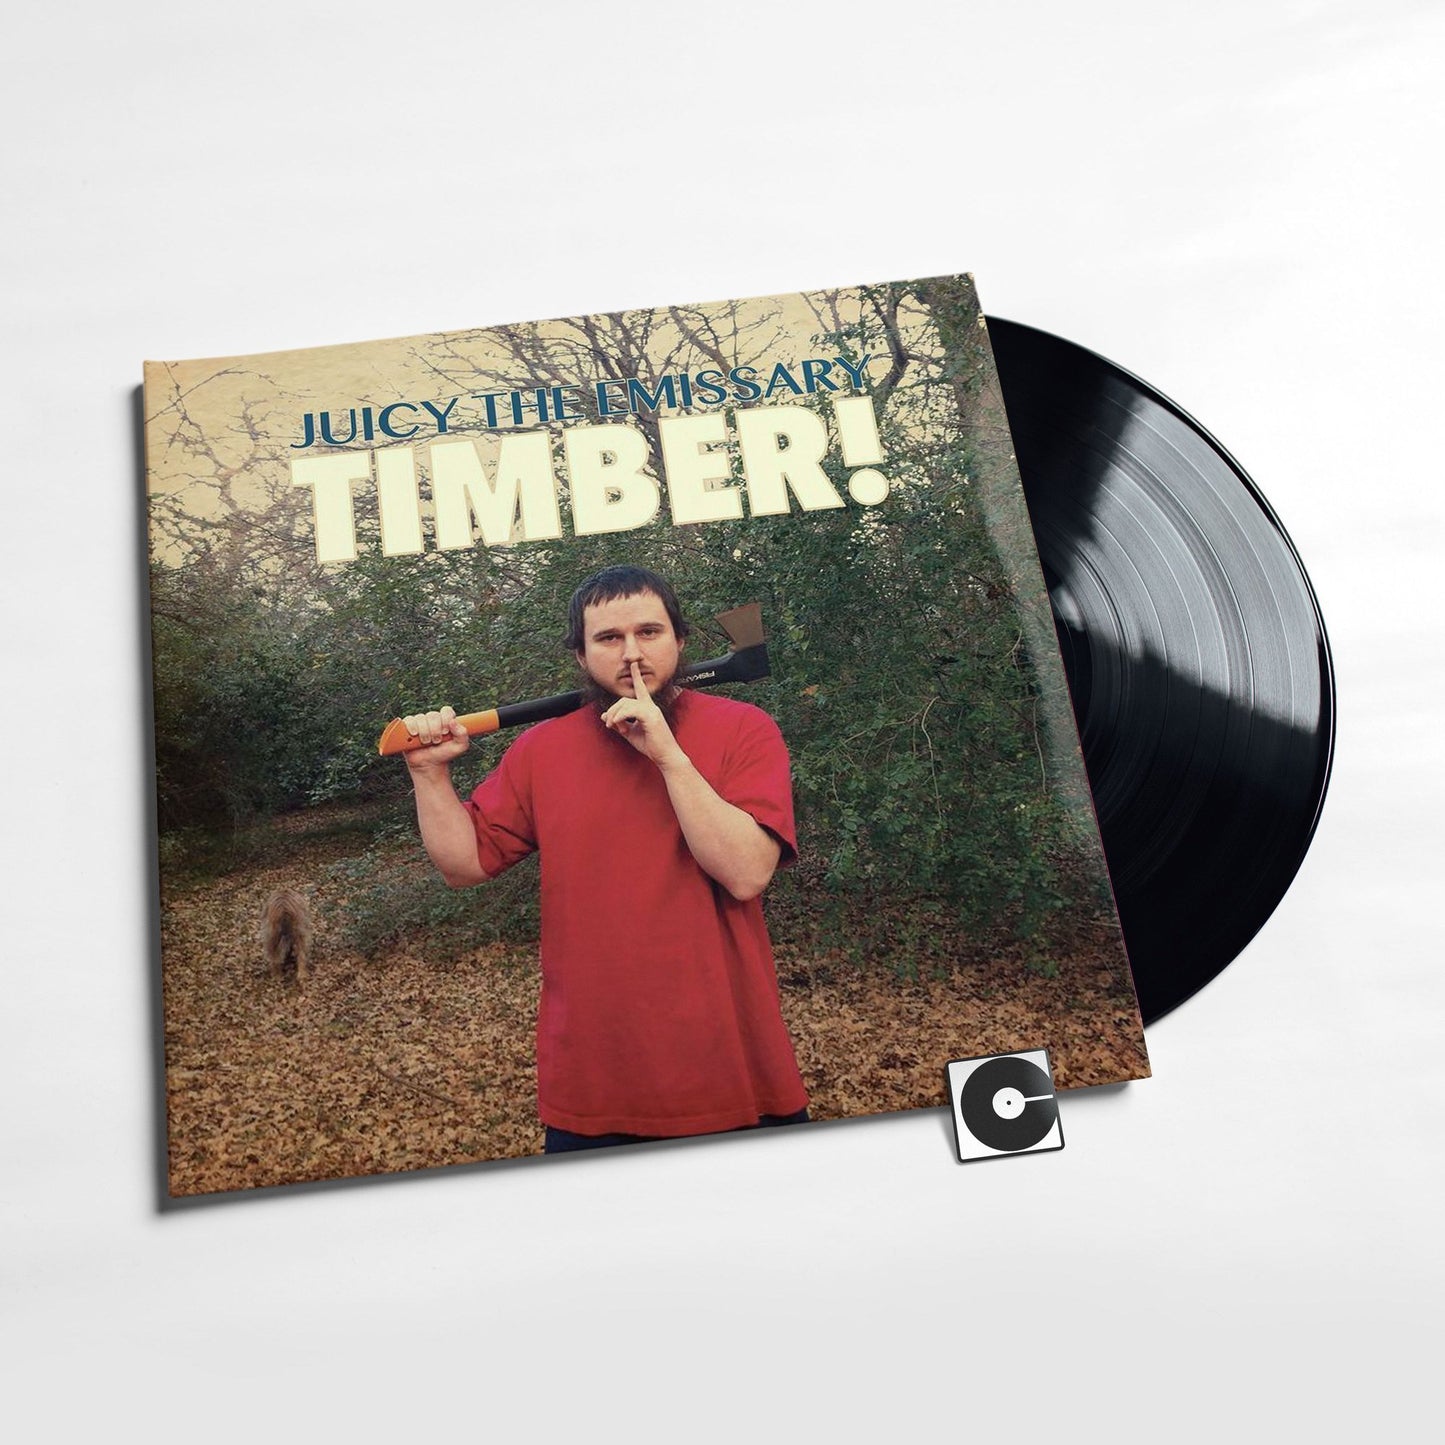 Juicy The Emissary - "Timber!"